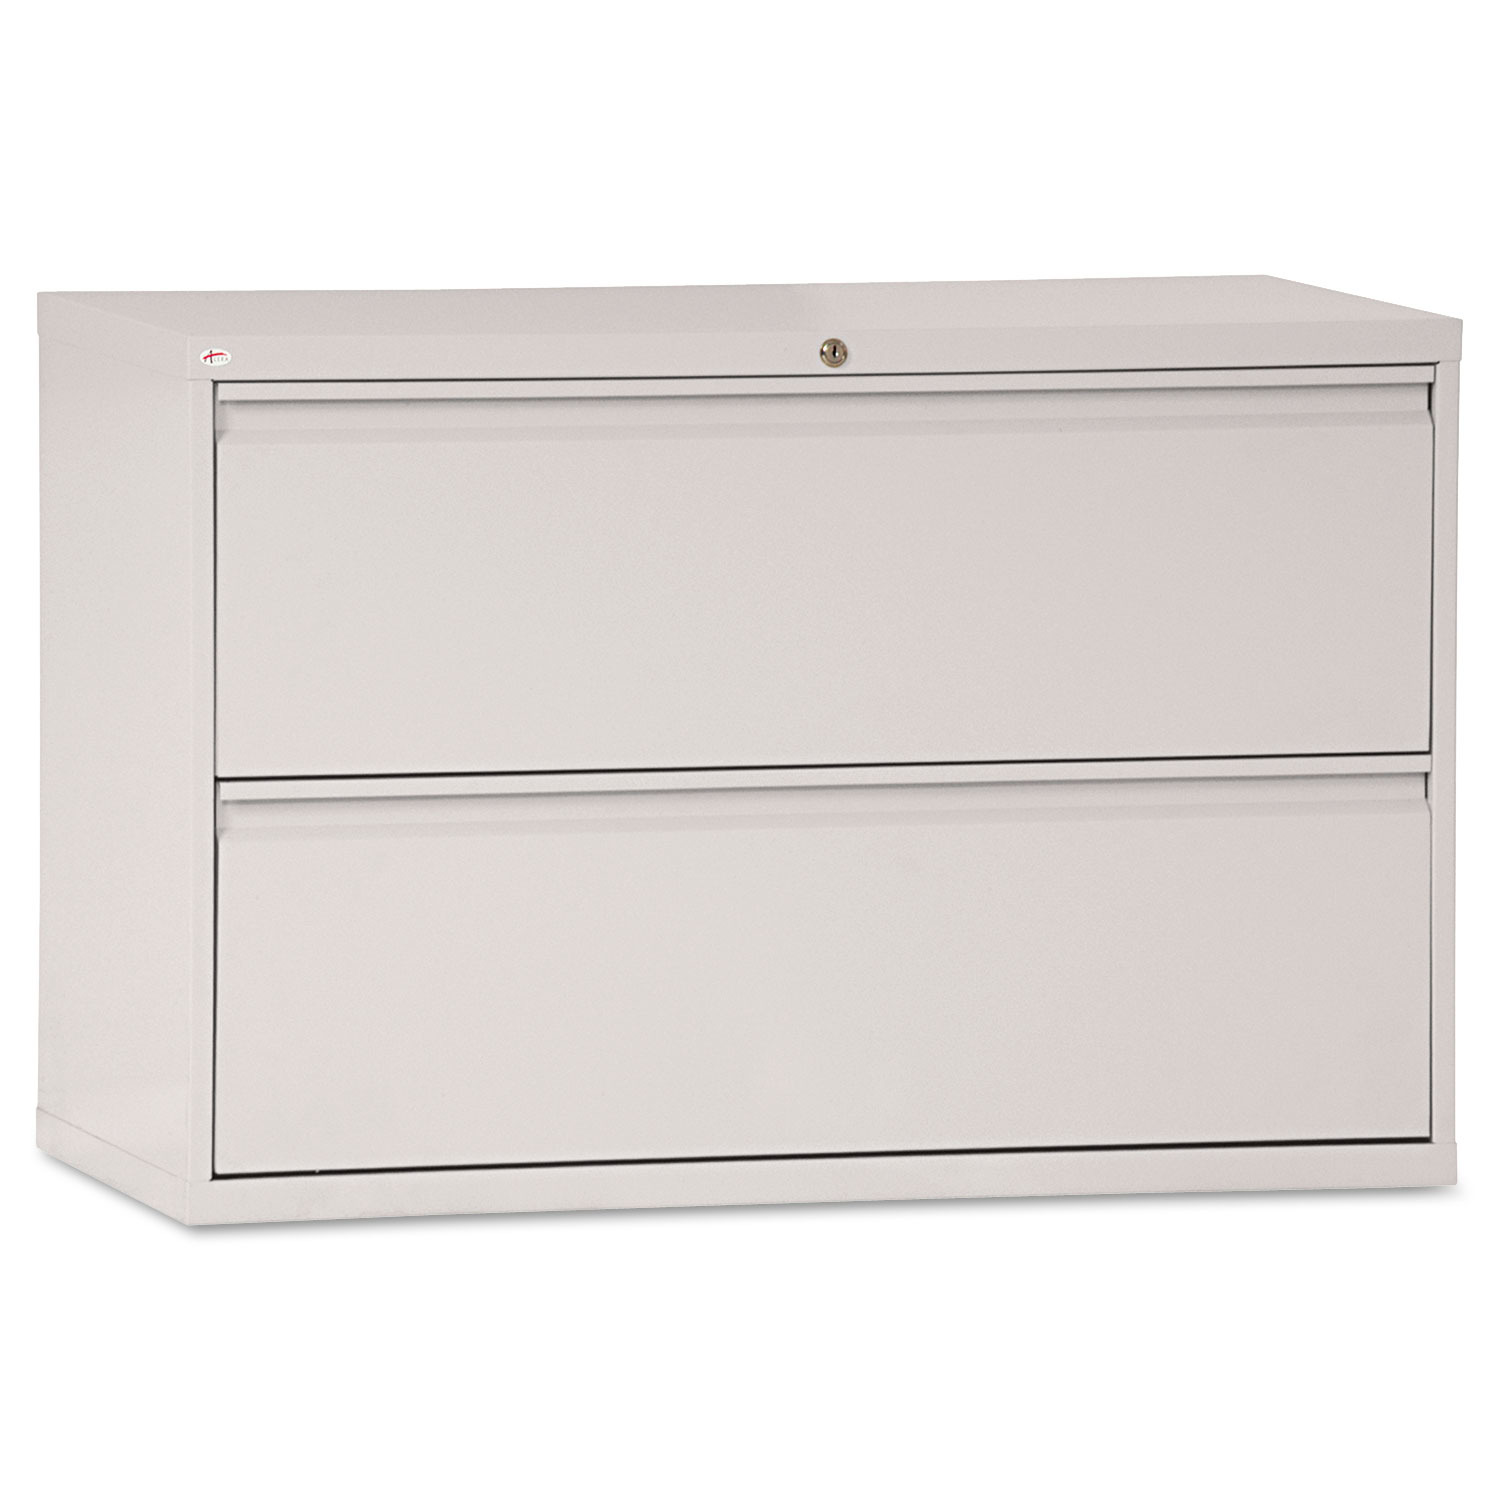 Alera Two-drawer Lateral File Cabinet, 42w X 18d X 28h, Light Gray - image 1 of 3